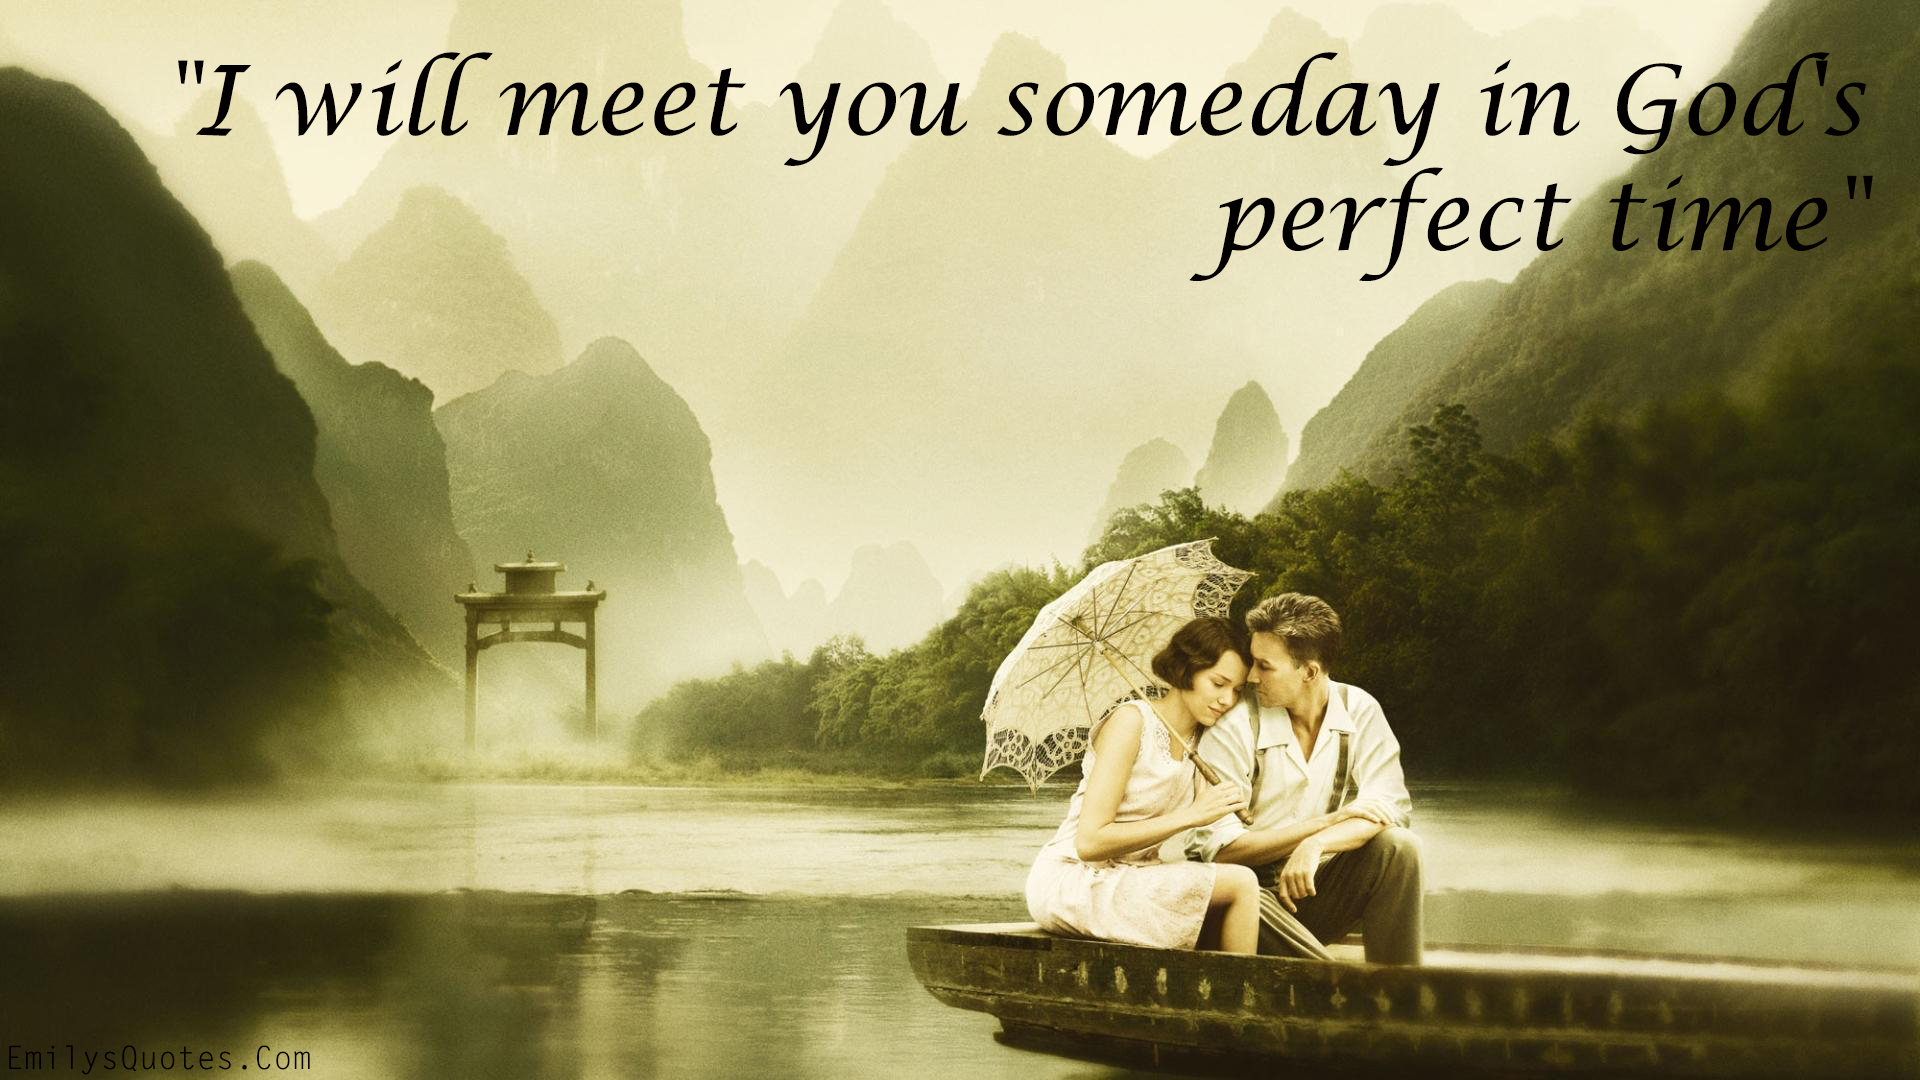 I will meet you someday in God’s perfect time | Popular inspirational